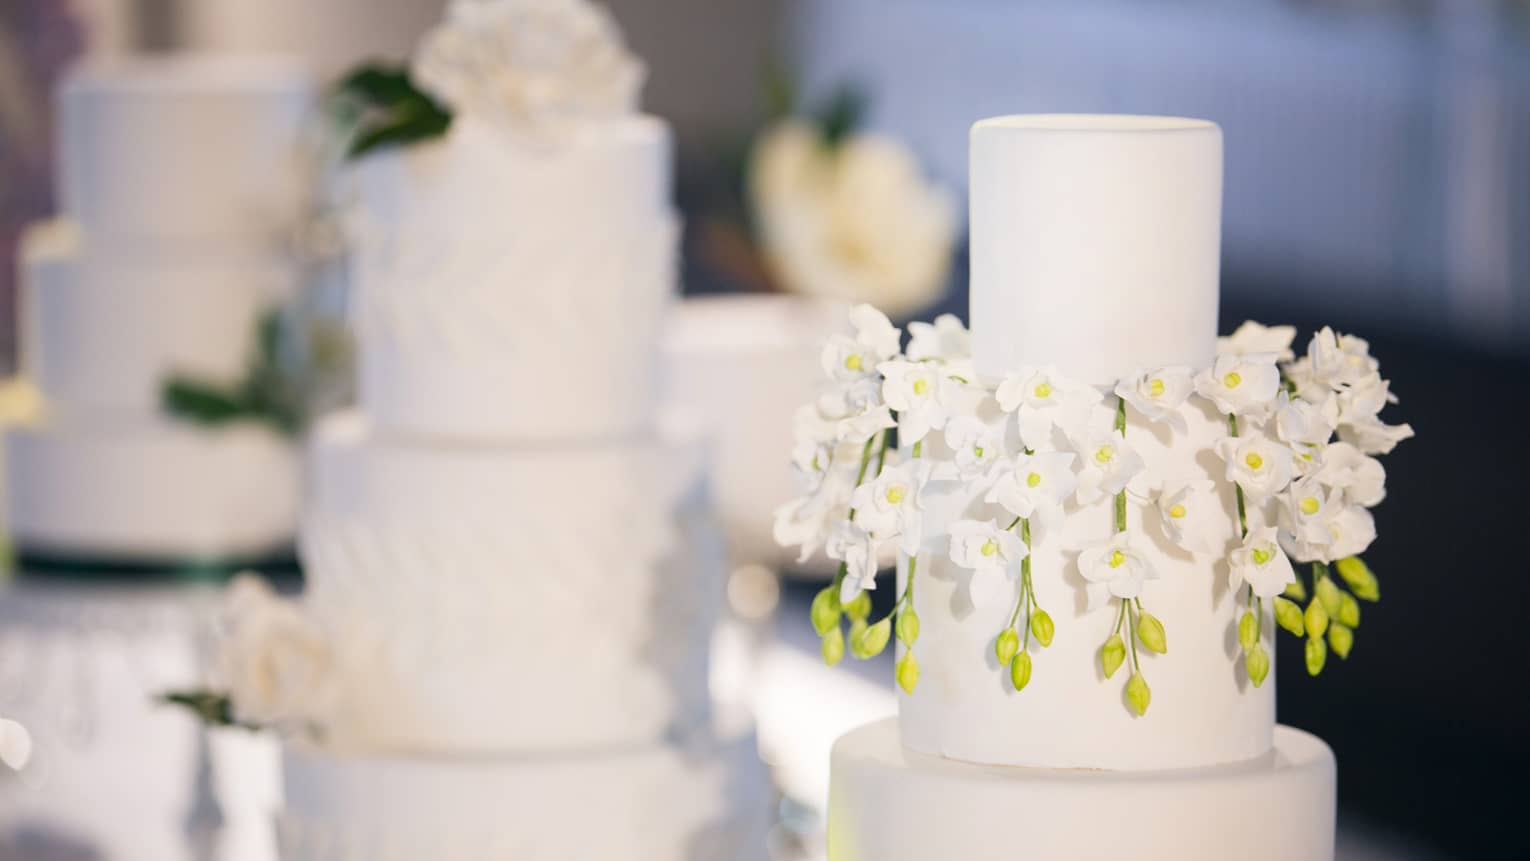 Three-tiered wedding cakes are each garnished with white florals 